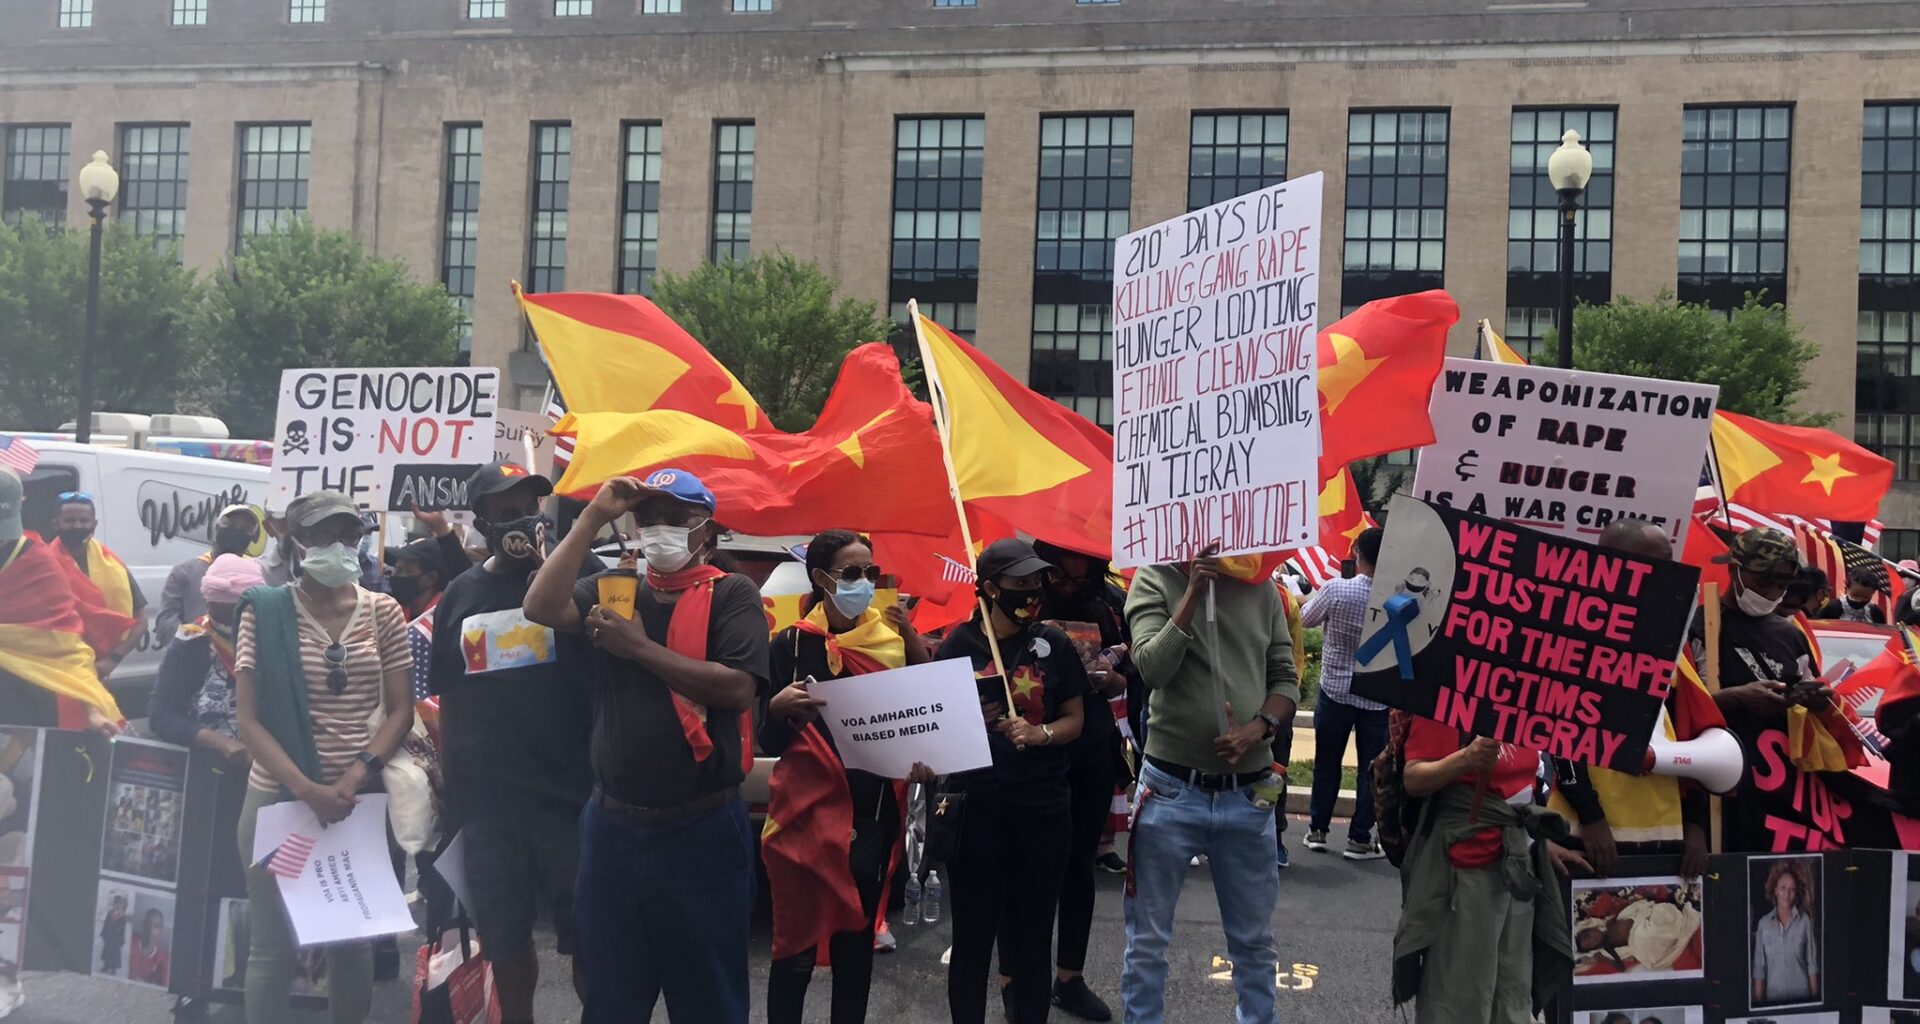 Washingtonian Tegaru protesting in front of the VOA building in DC demanding they cover #TigrayGenocide. The photo was posted on Twitter on June 2, 2021 by Rahel Tigraweyti (ሃገረ ዓባይ ትግራይ) @RYifter.